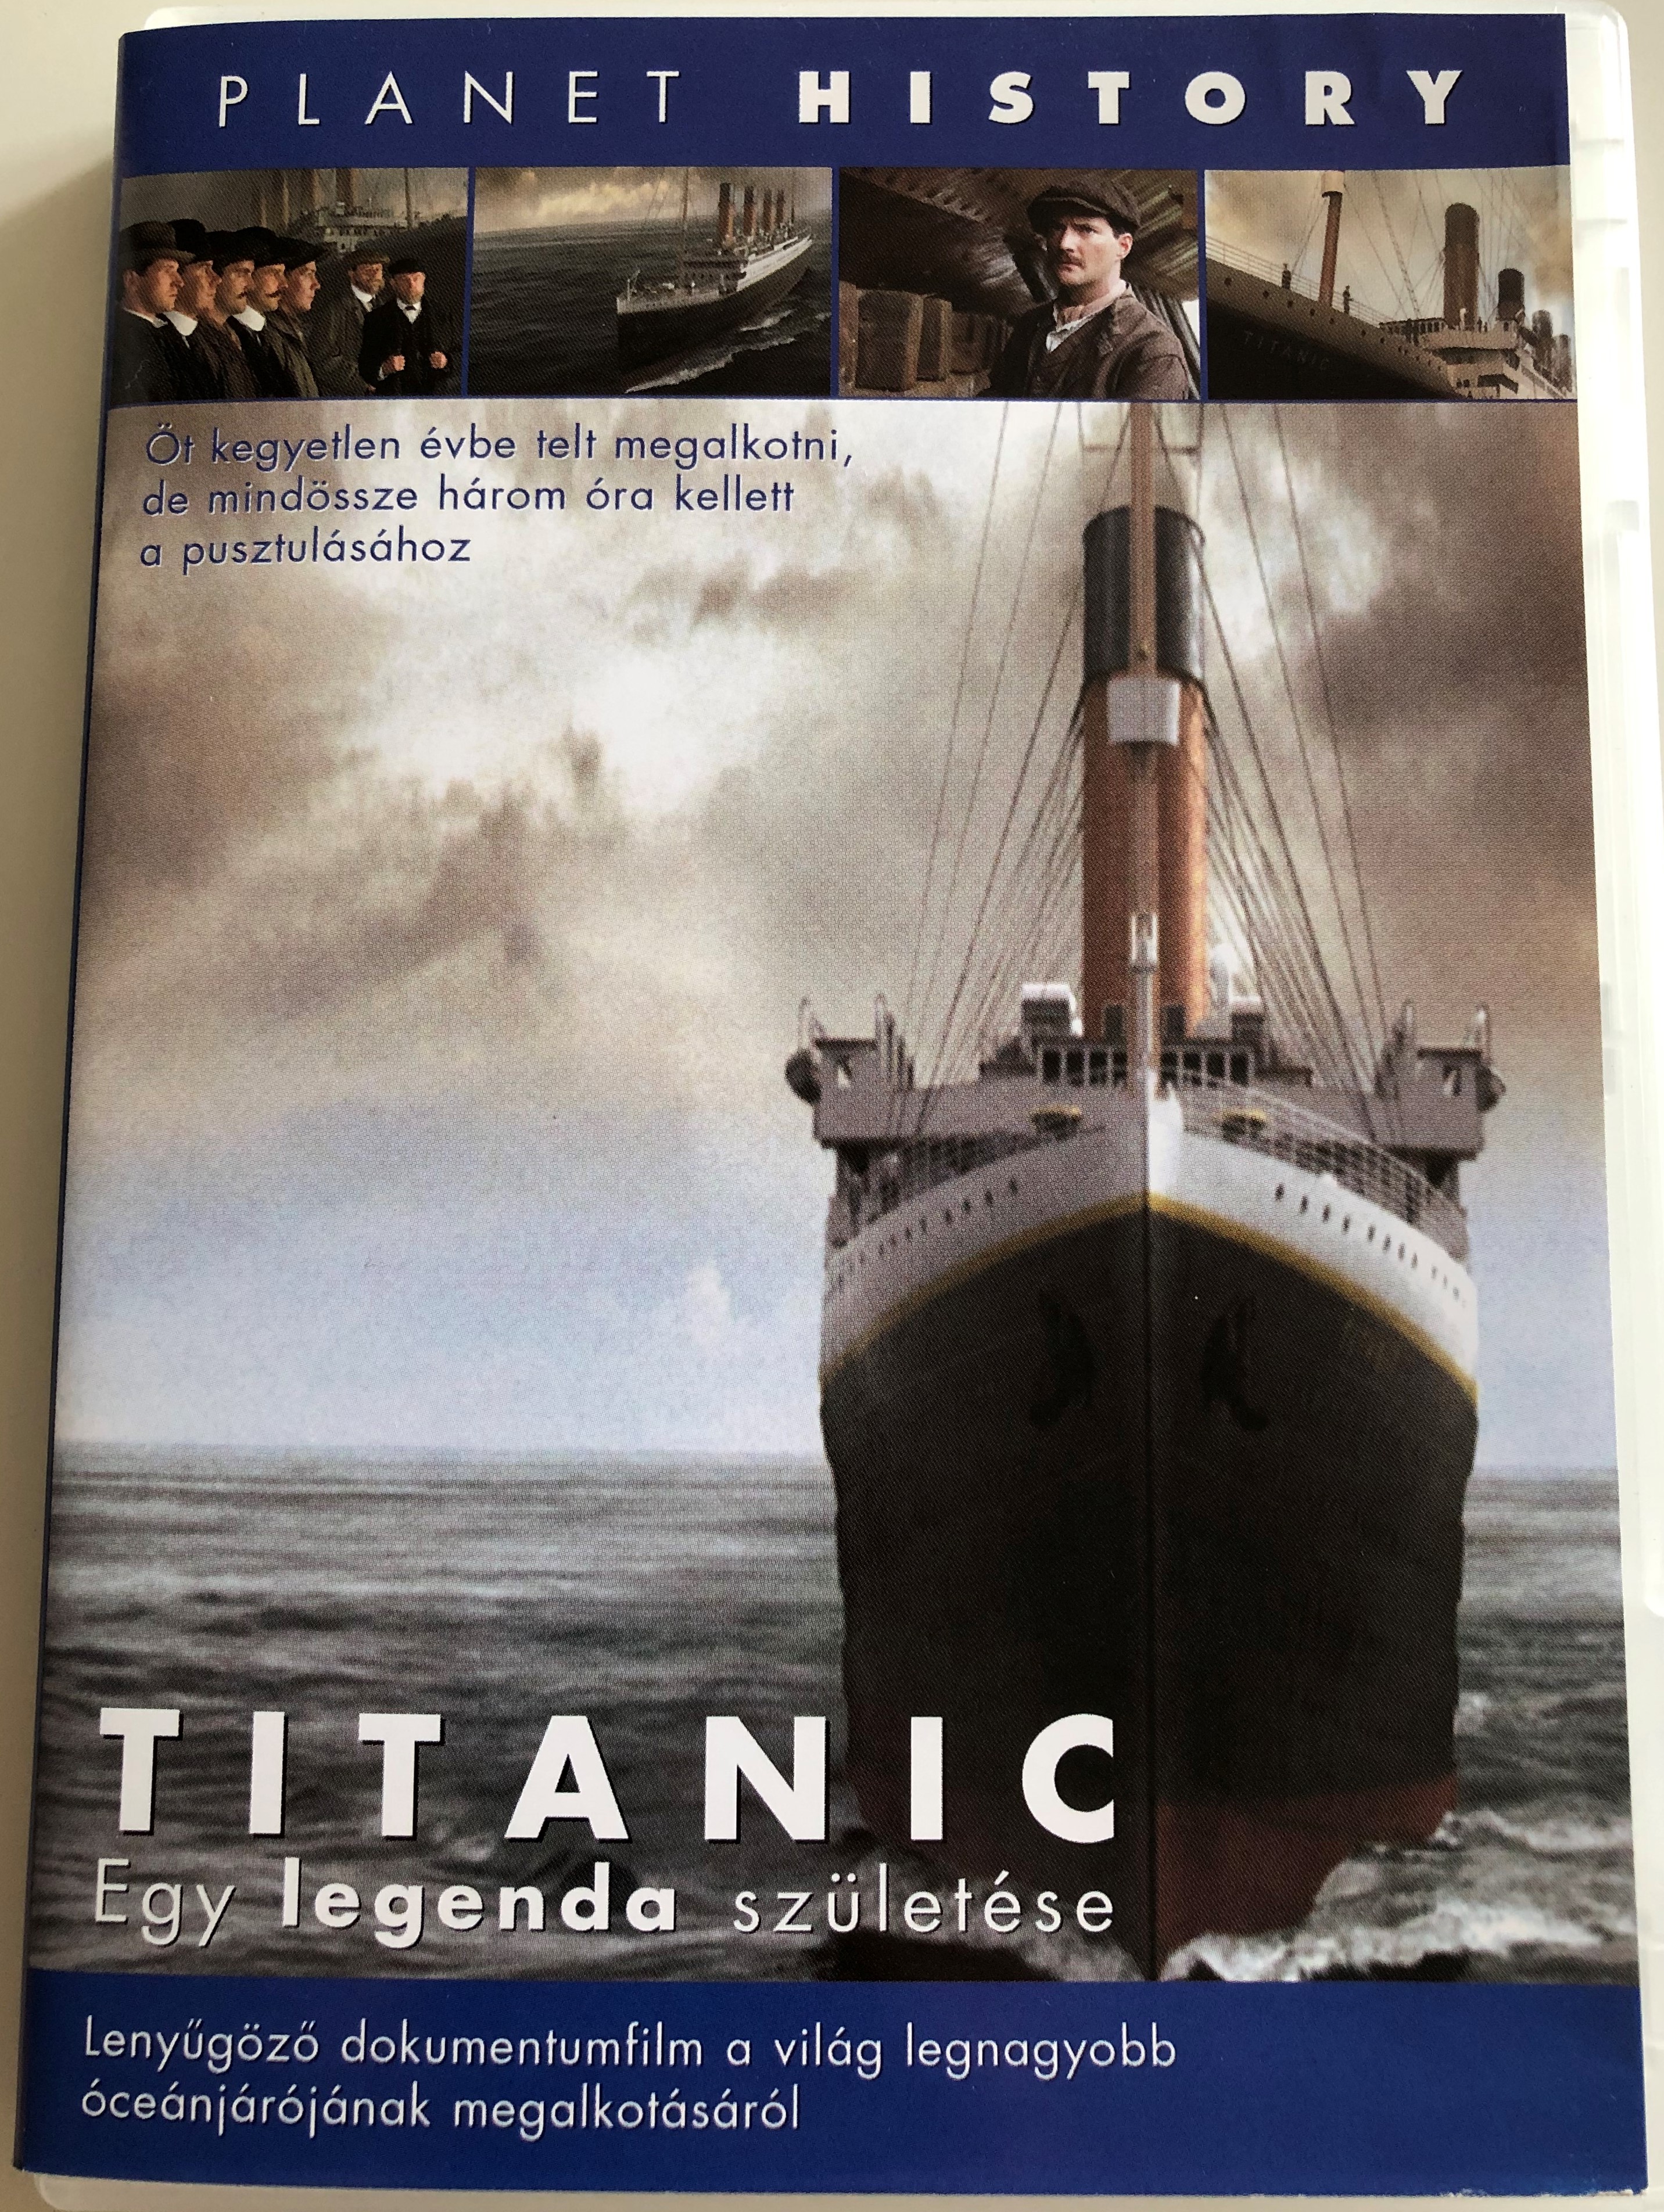 Titanic: Birth of a Legend DVD 2007 Titanic - egy legenda születése /  Planet History / Directed by William Lyons / Starring: Gordon  Langford-Rowe, Charles Lawson, Damian O'hare, Christopher Wright /  Dramatised